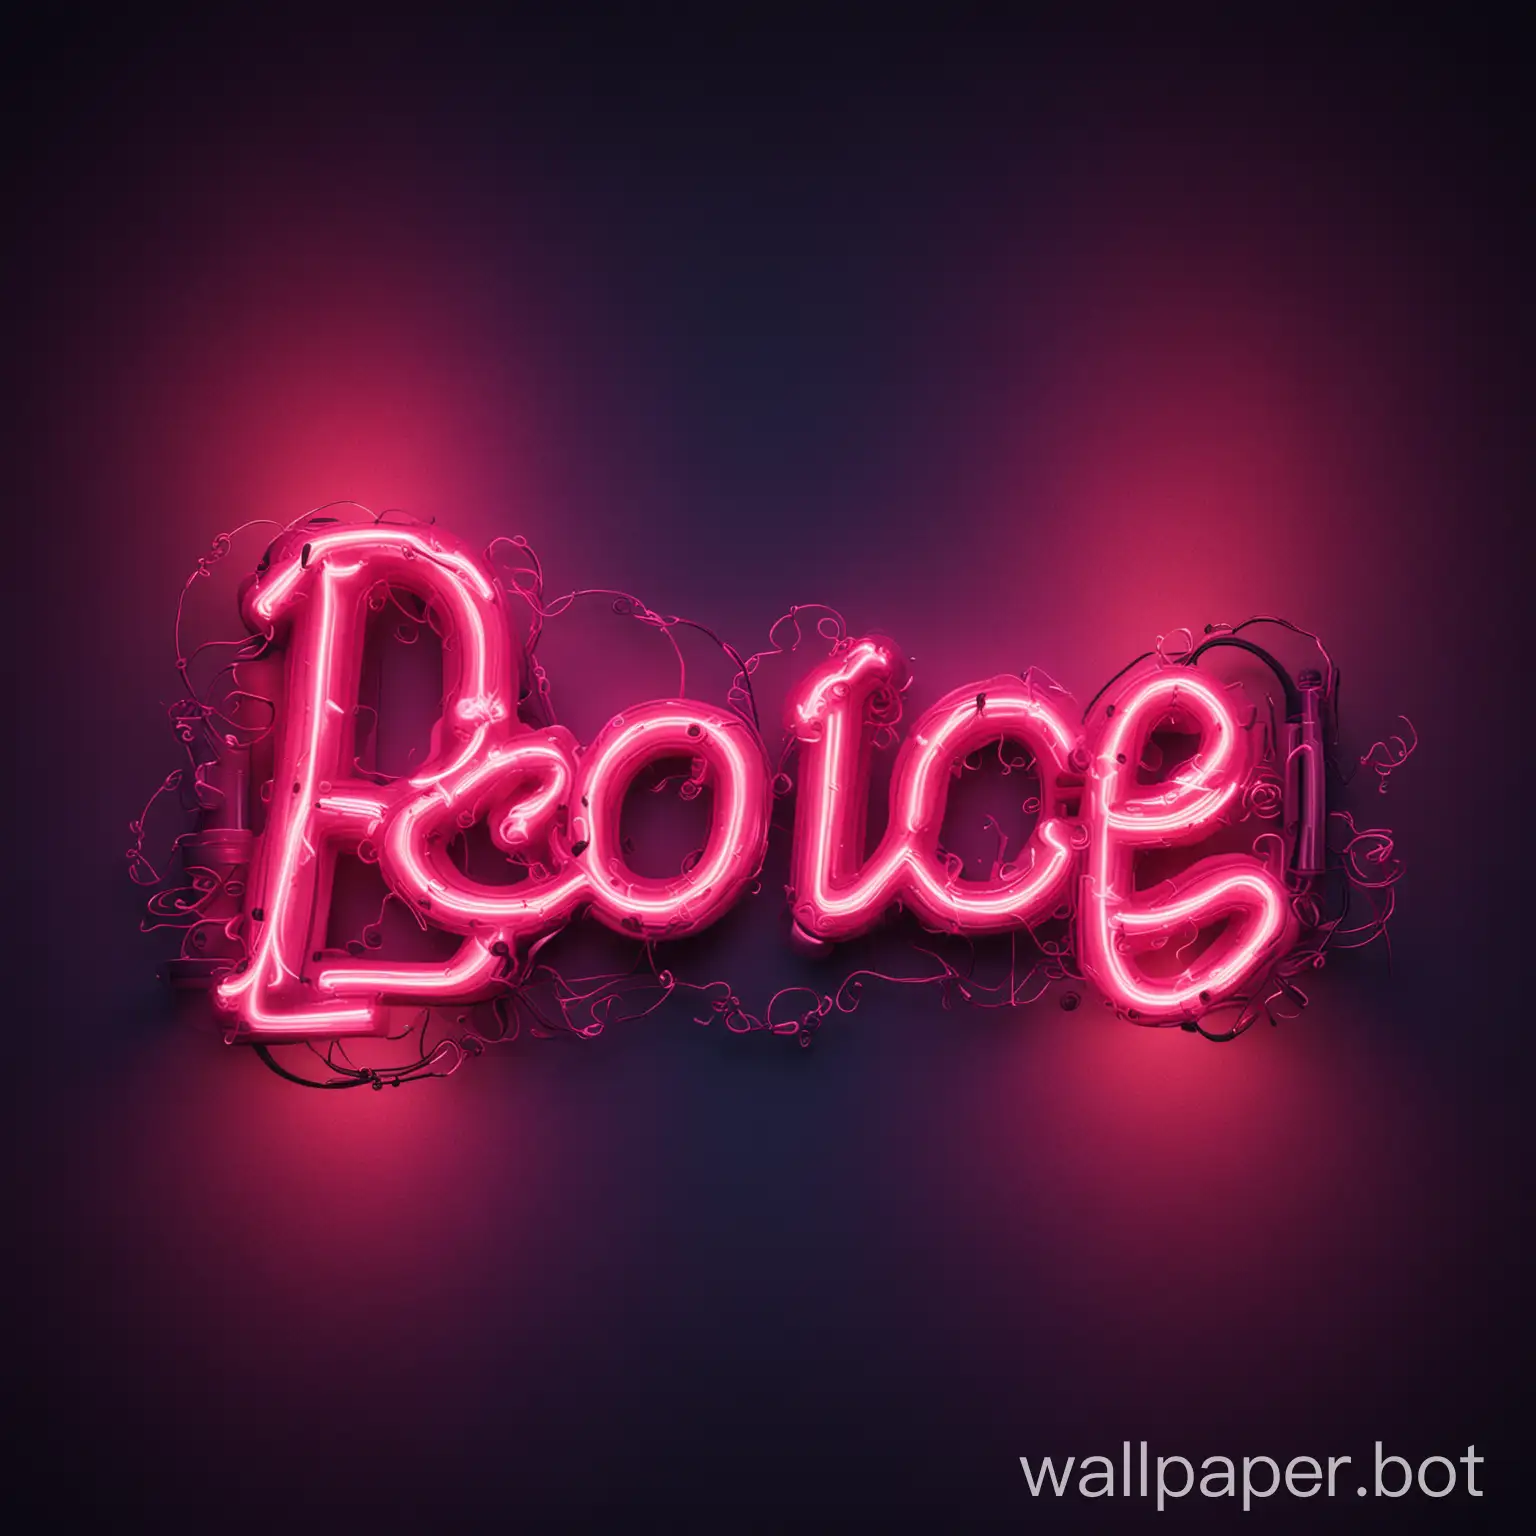 A Neon Love Background With A Glowing Curly Text 'Rejoice'